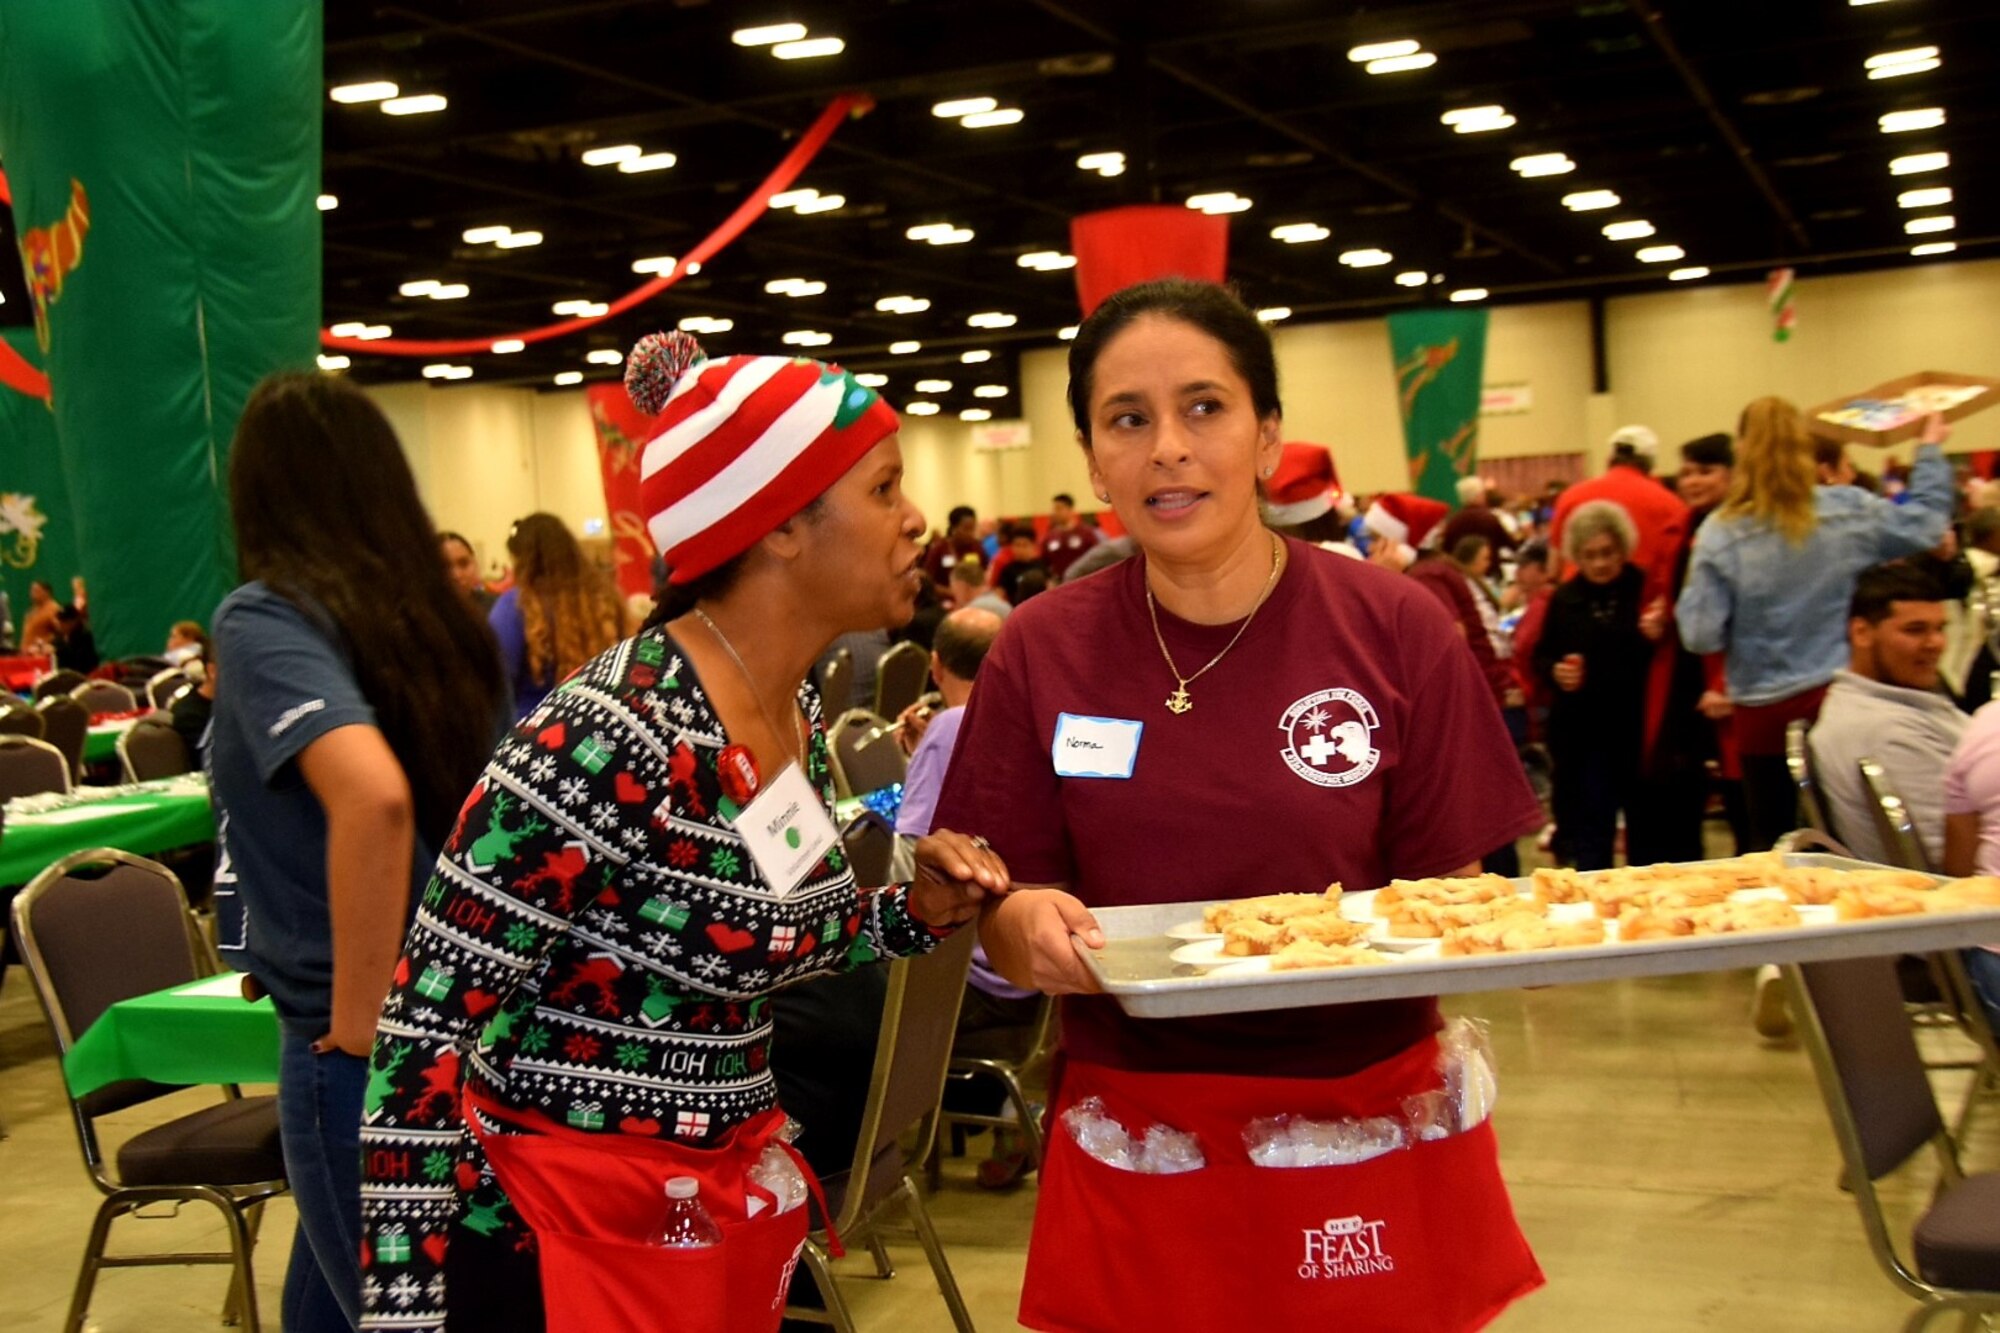 Reserve Citizen Airmen from the 433rd Airlift Wing joined forces with 1,000 other volunteers from the Greater San Antonio Area in serving more than 10,000 meals during the afternoon shift at H-E-B’s 26th Annual Feast of Sharing holiday dinner Dec. 23 at the Henry B. Gonzalez Convention Center in San Antonio, Texas.